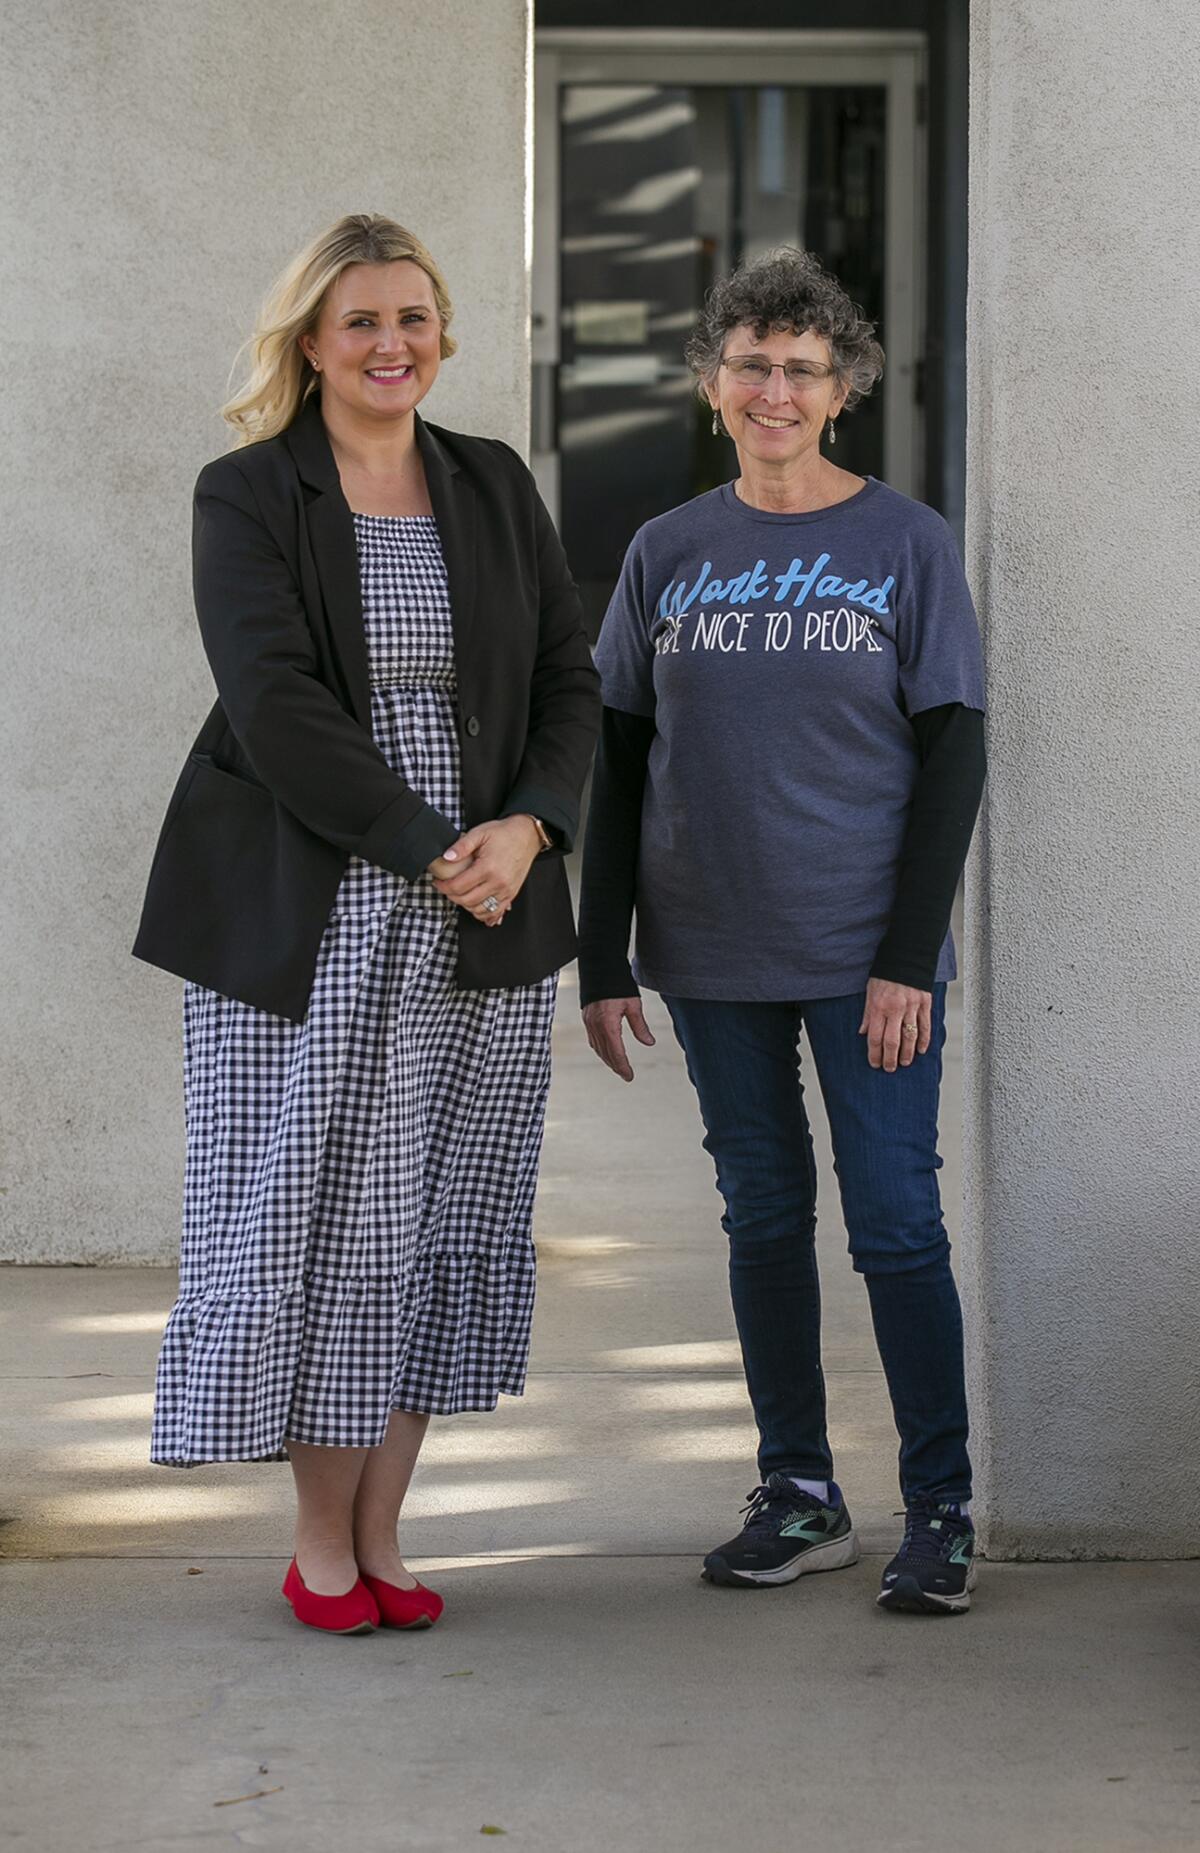 Sarah Roberts, left, teaches at Mesa View Middle School and Joan Ashley, right, teaches at Circle View Elementary School.